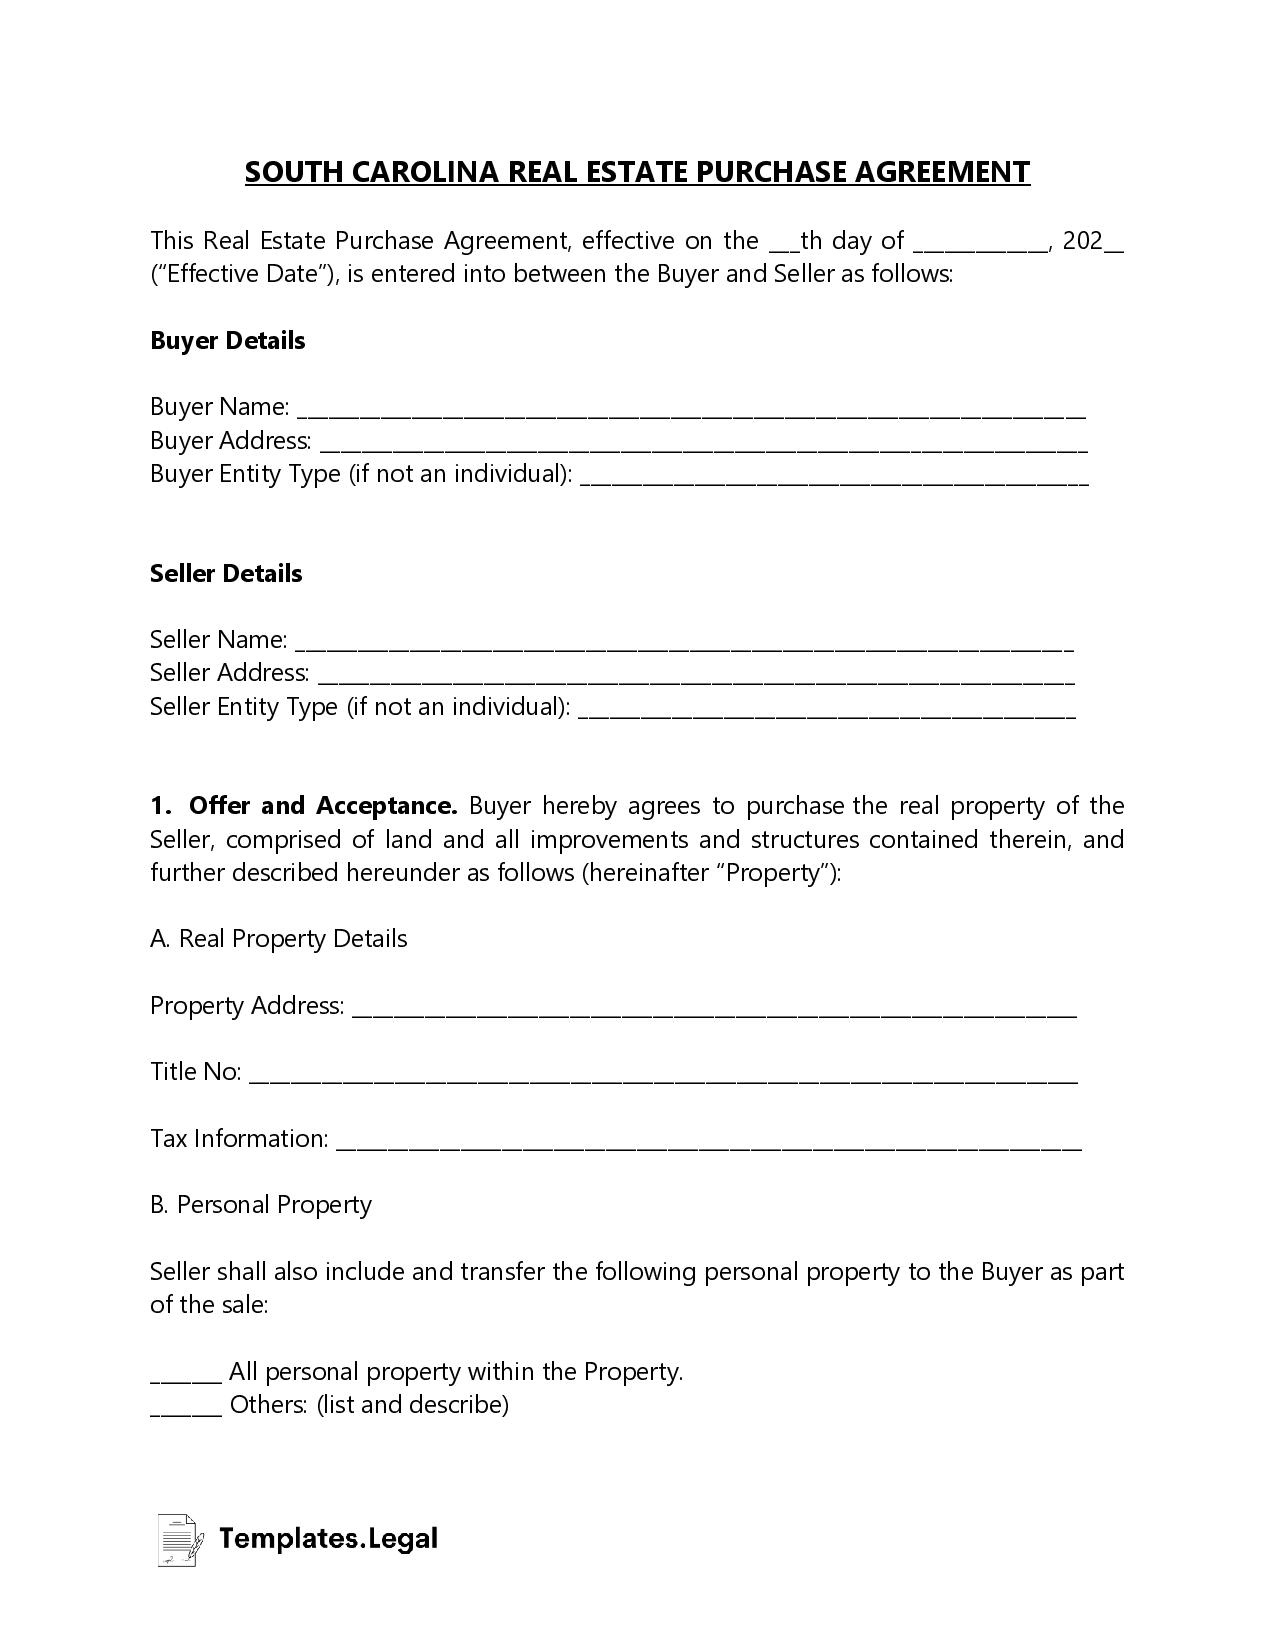 South Carolina Real Estate Purchase Agreement - Templates.Legal